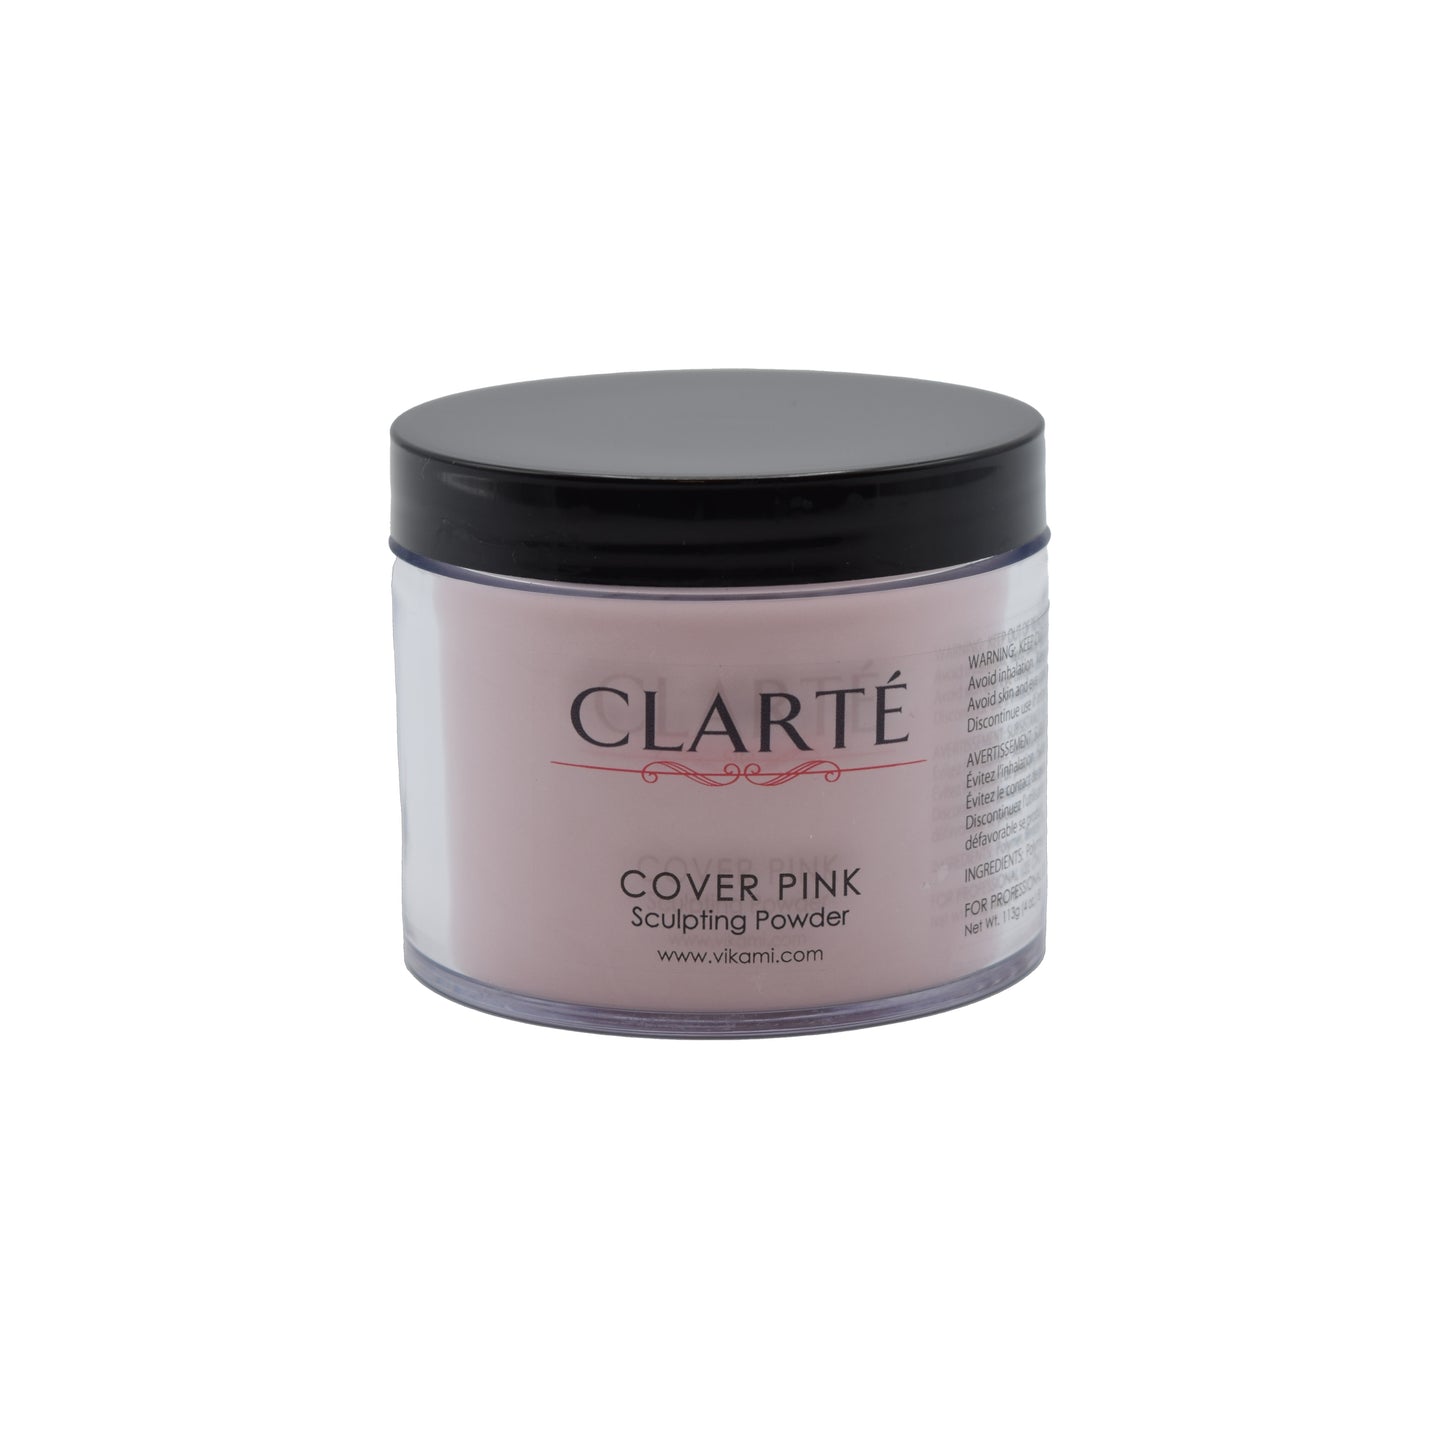 CLARTE - Cover Pink